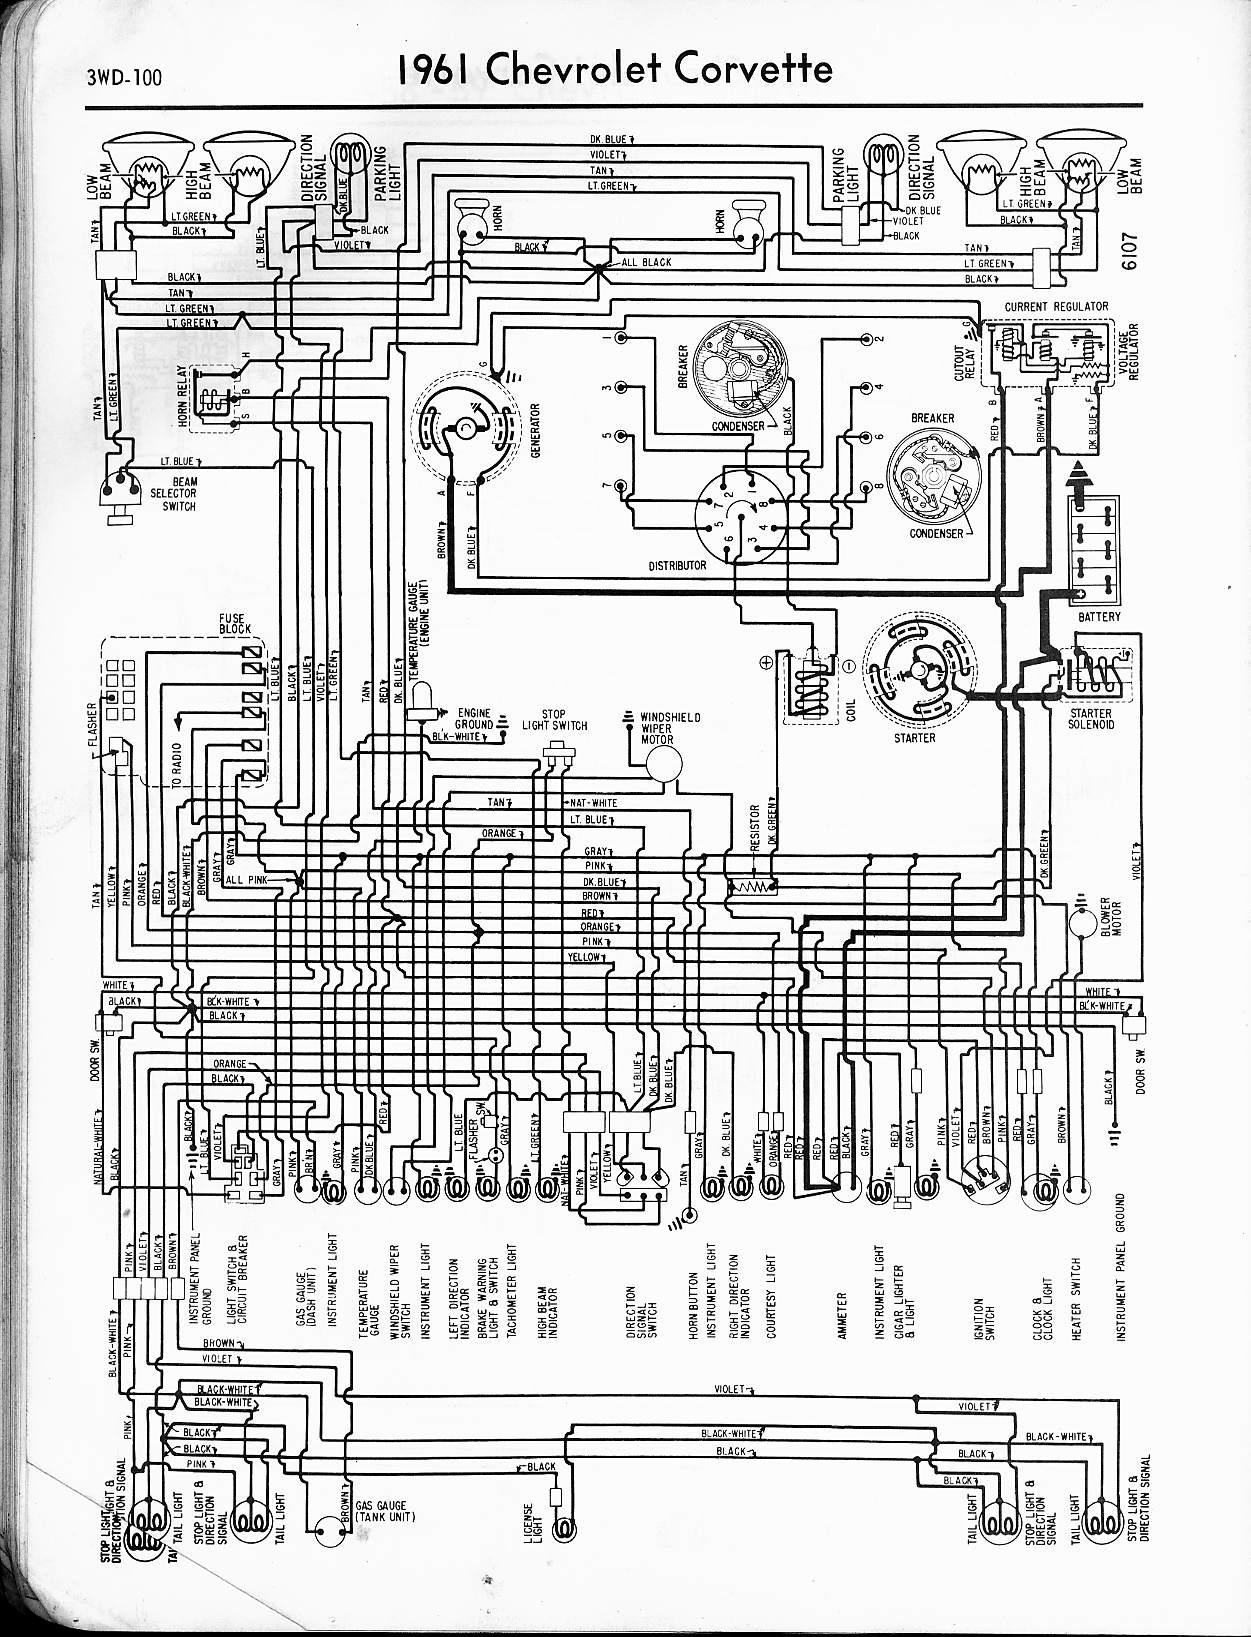 Chevy 350 Spark Plug Wiring Diagram from www.oldcarmanualproject.com